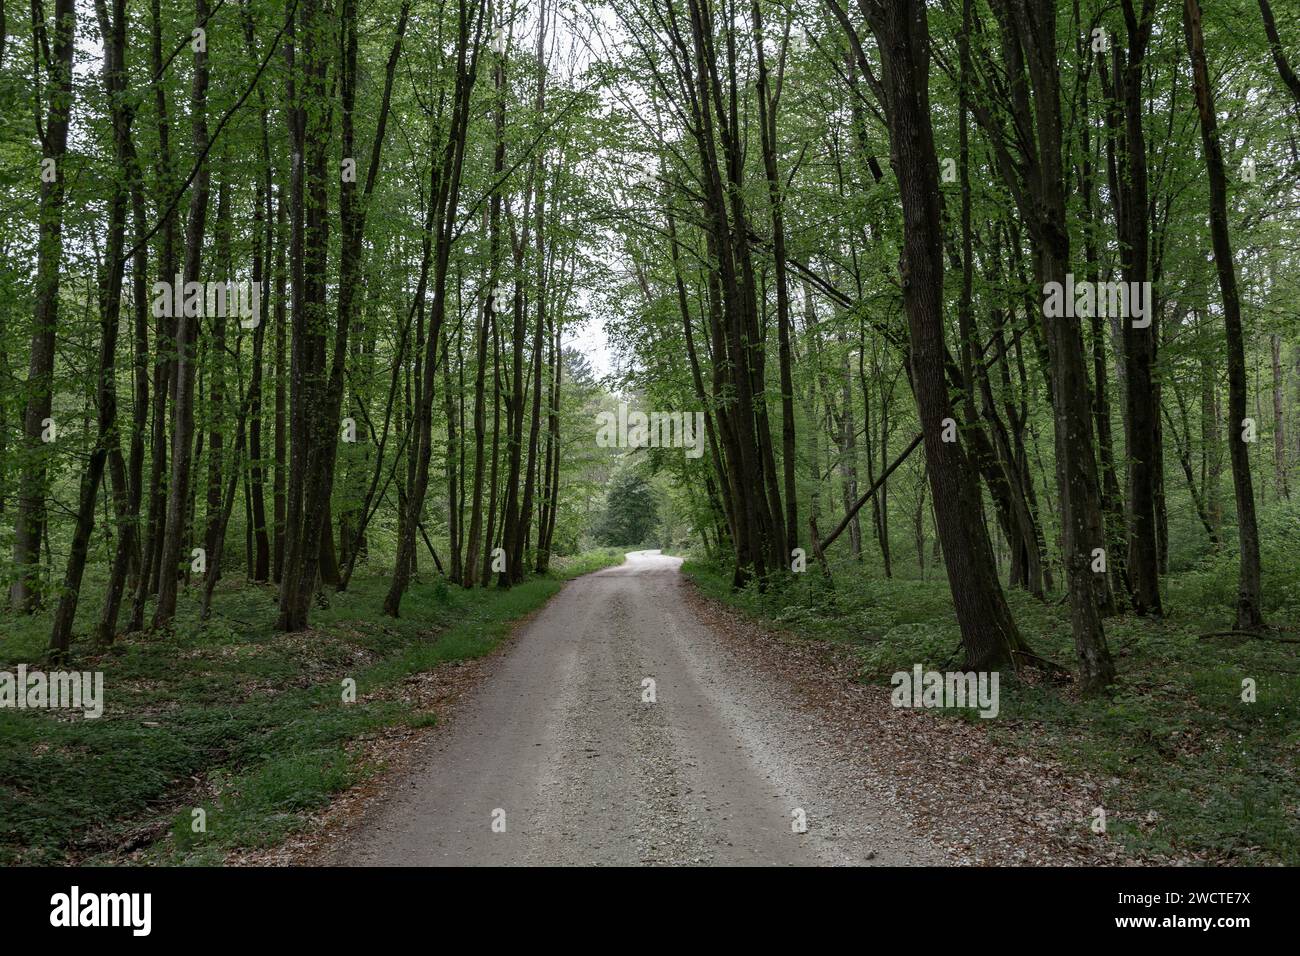 A scenic landscape of a road in the forest with trees on each side of the way. Stock Photo